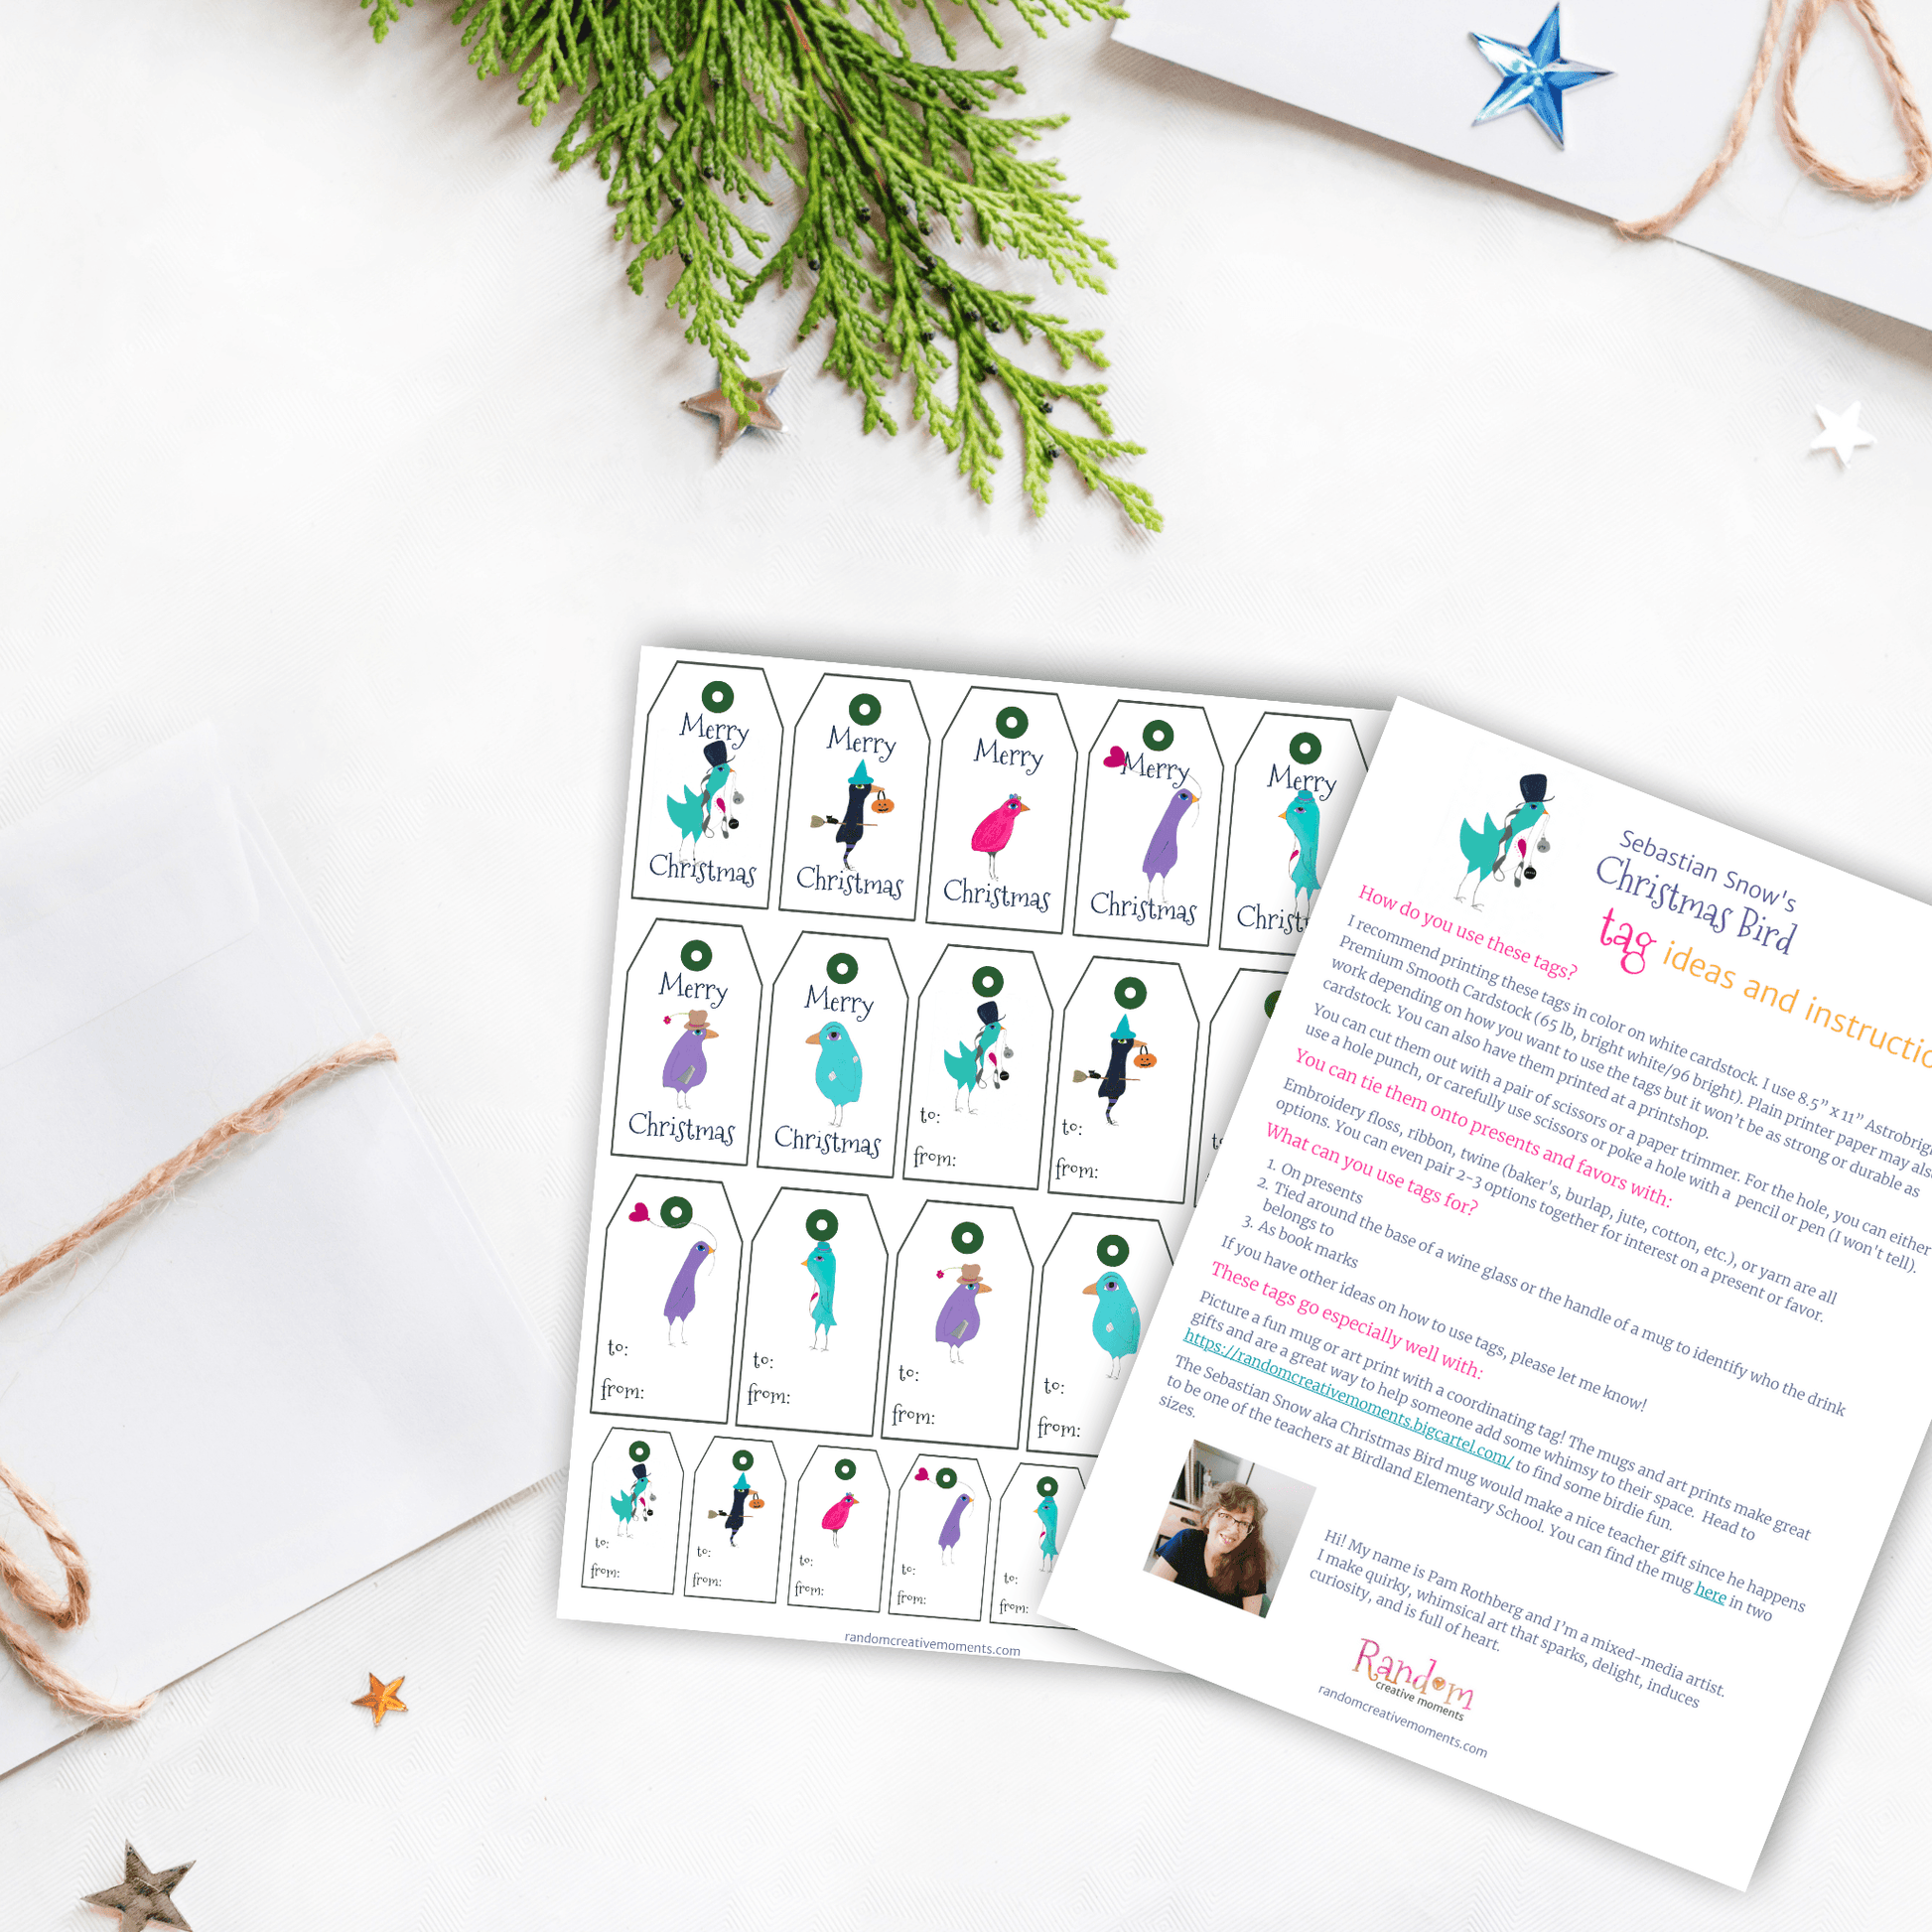 Christmas gift tags for Christmas present gifts and party favors | Everybirdy | classic + small size (Printable PDF) - randomcreativemoments